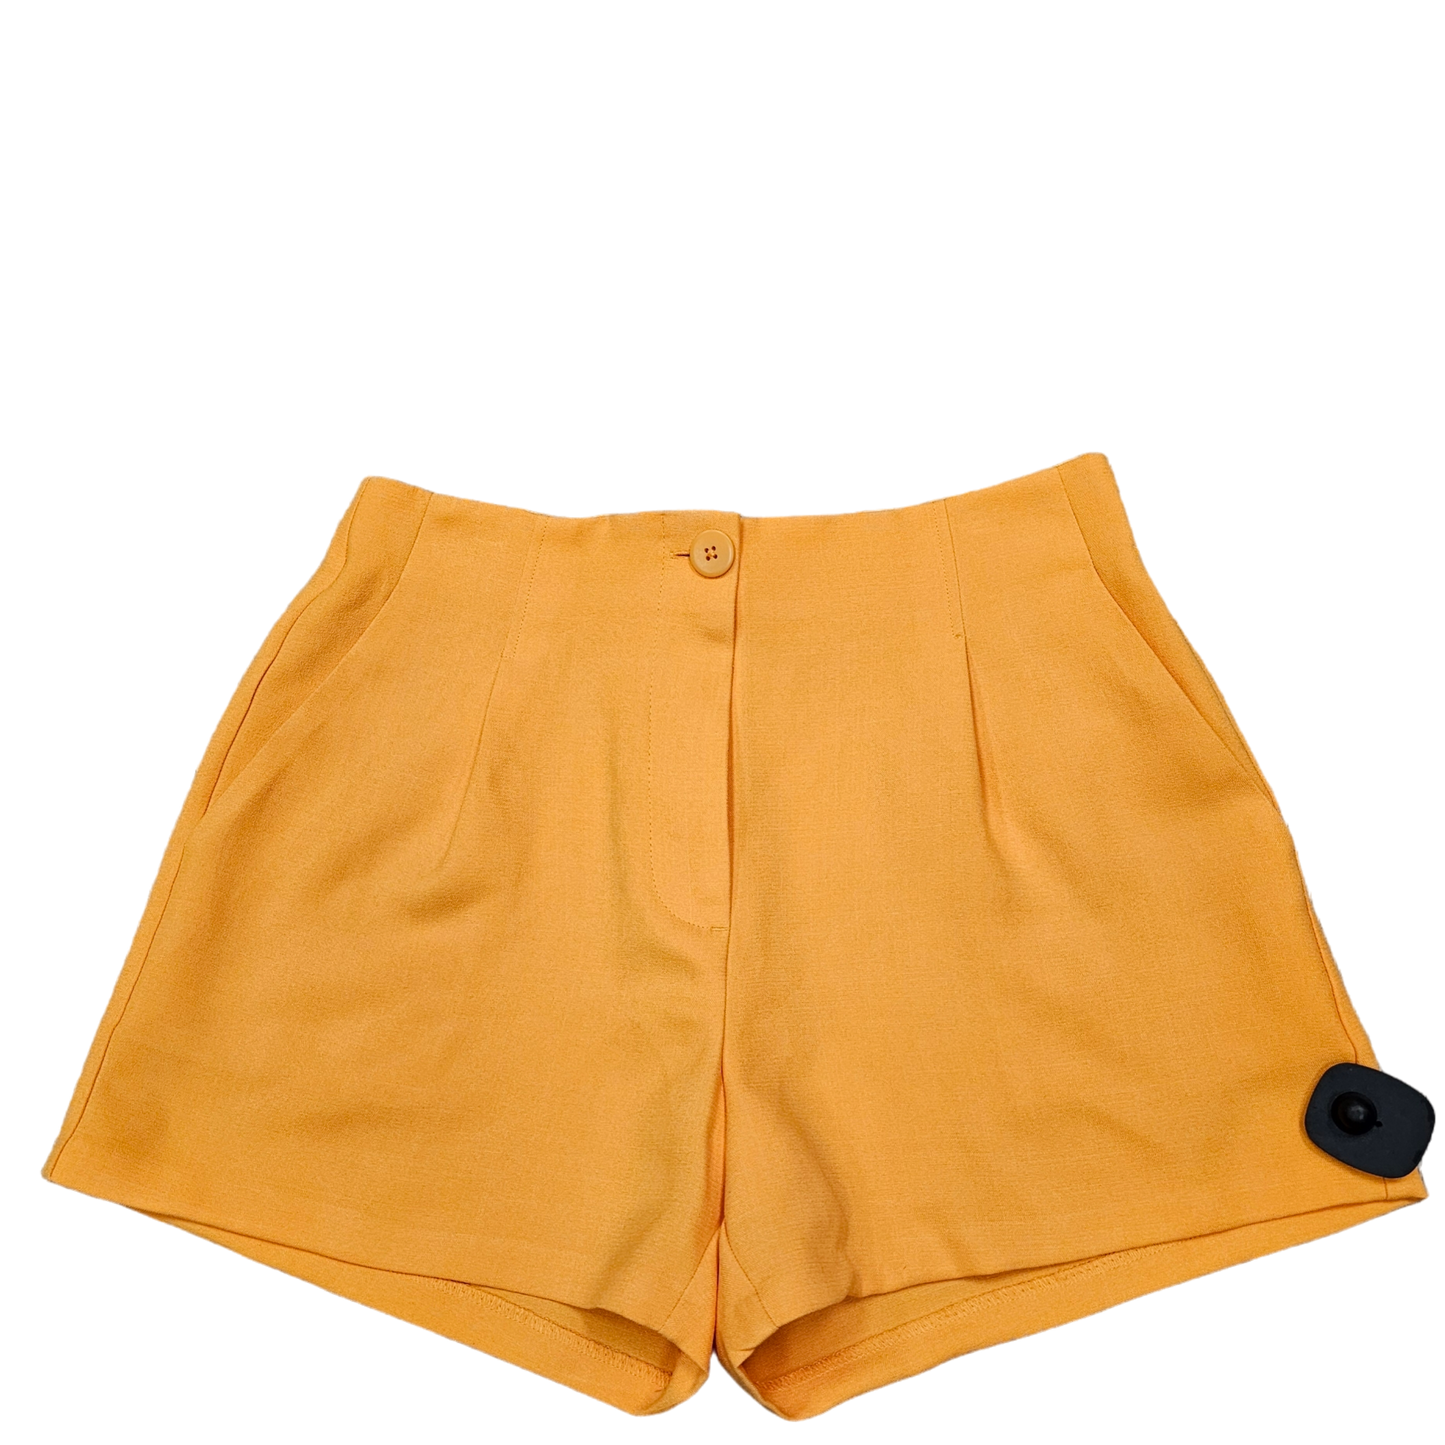 Shorts By Primark  Size: 8